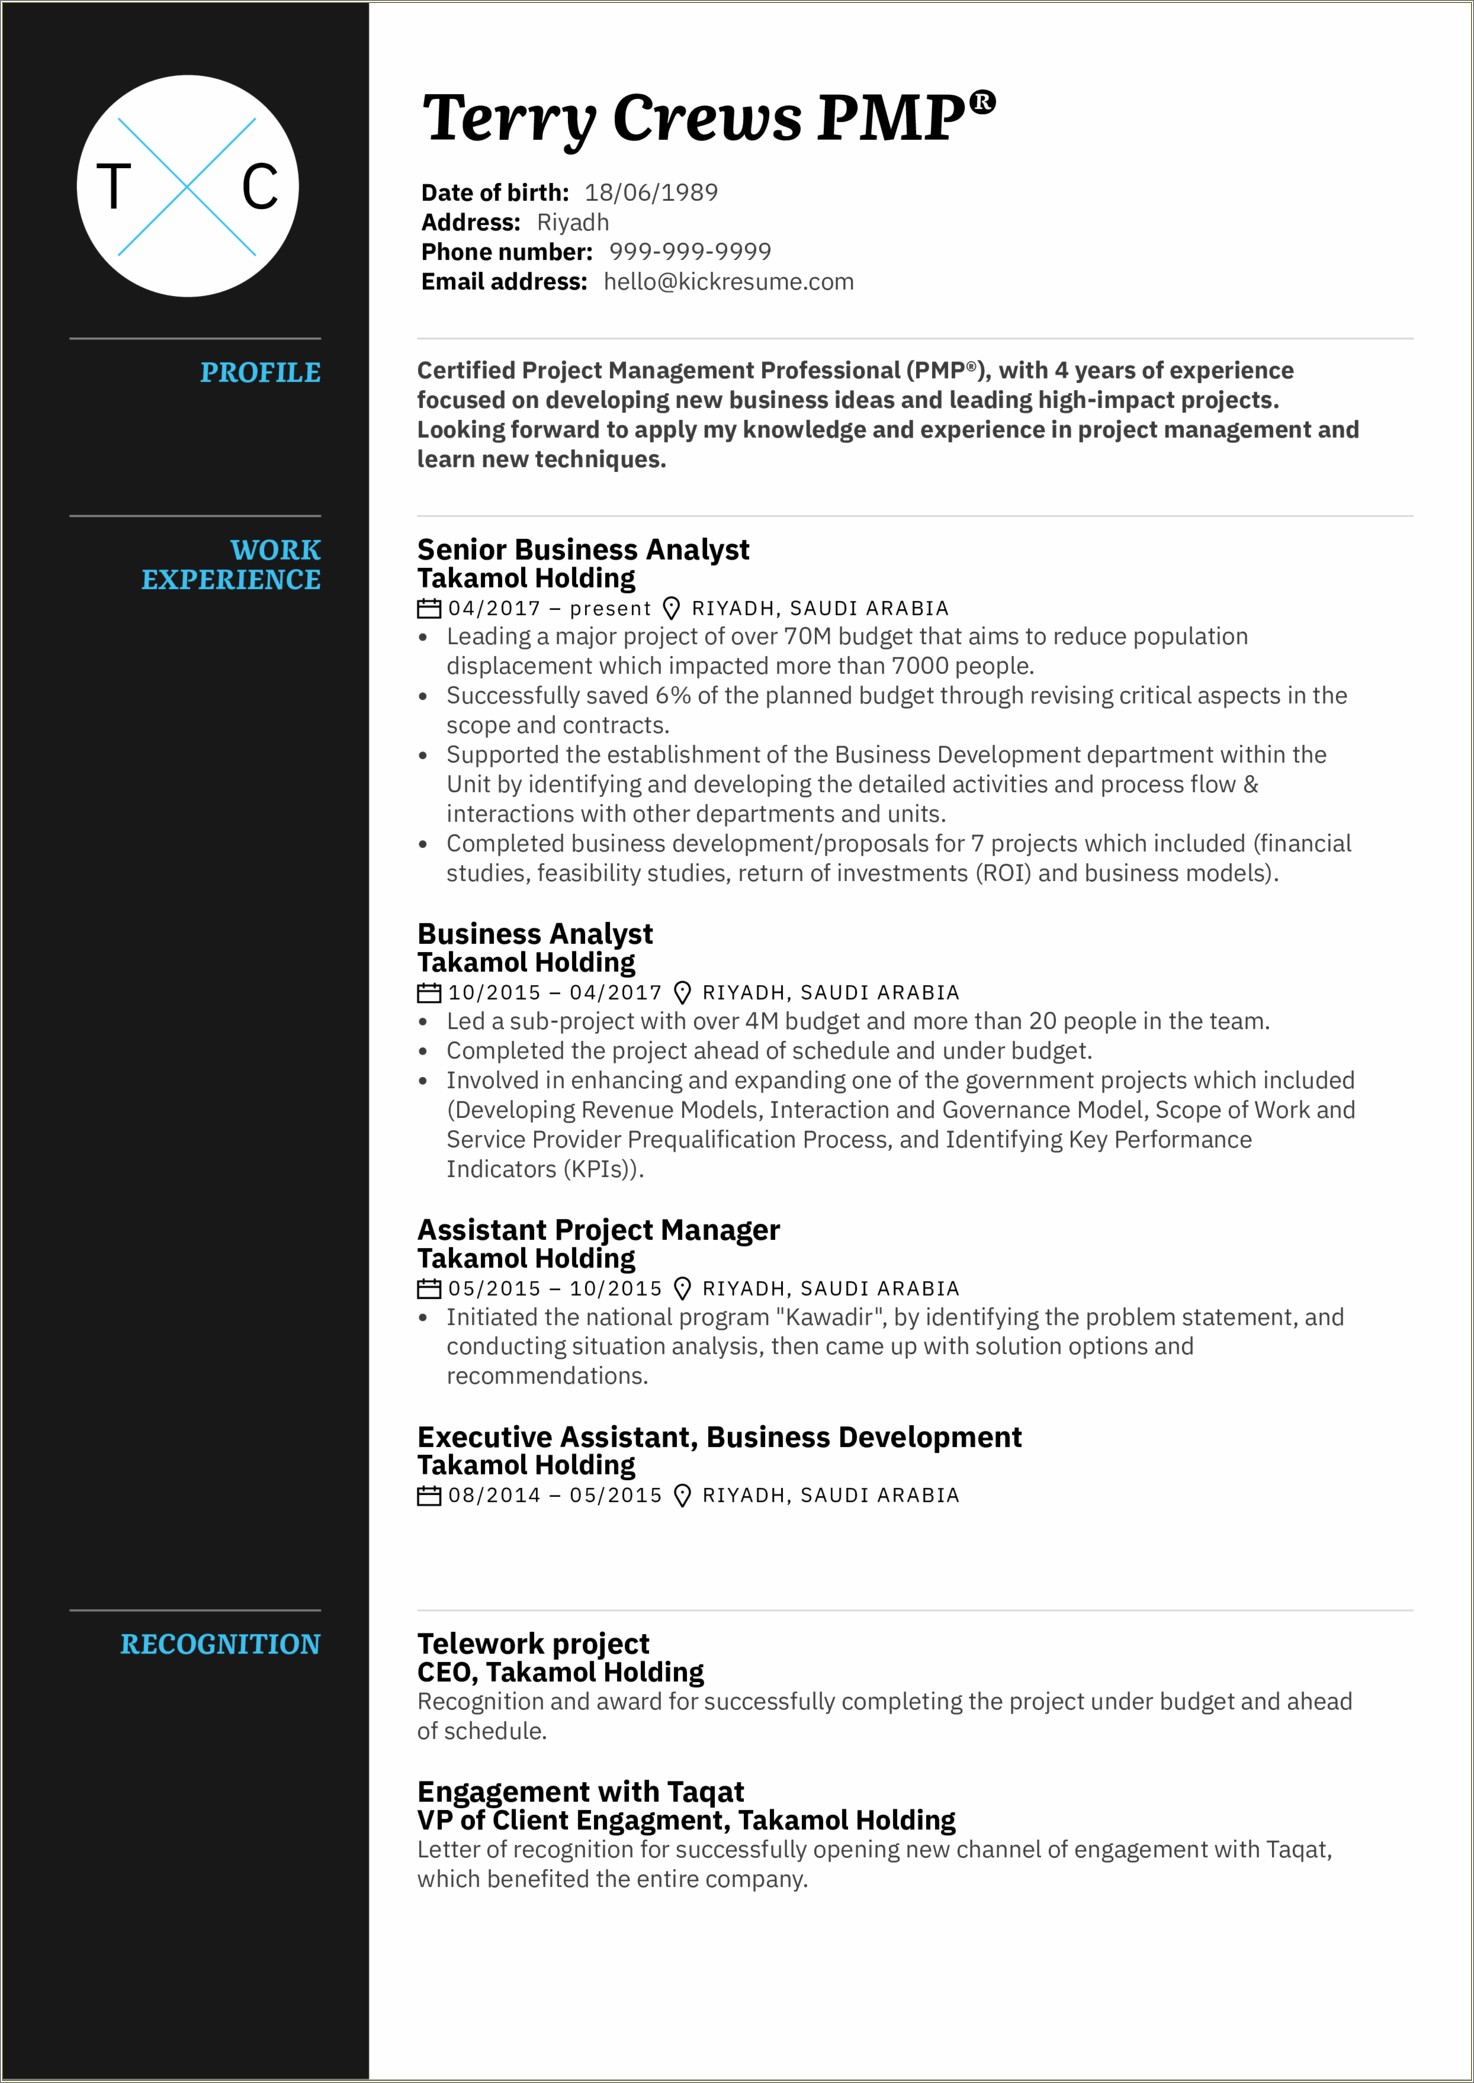 Experience Summary In Resume For Project Manager